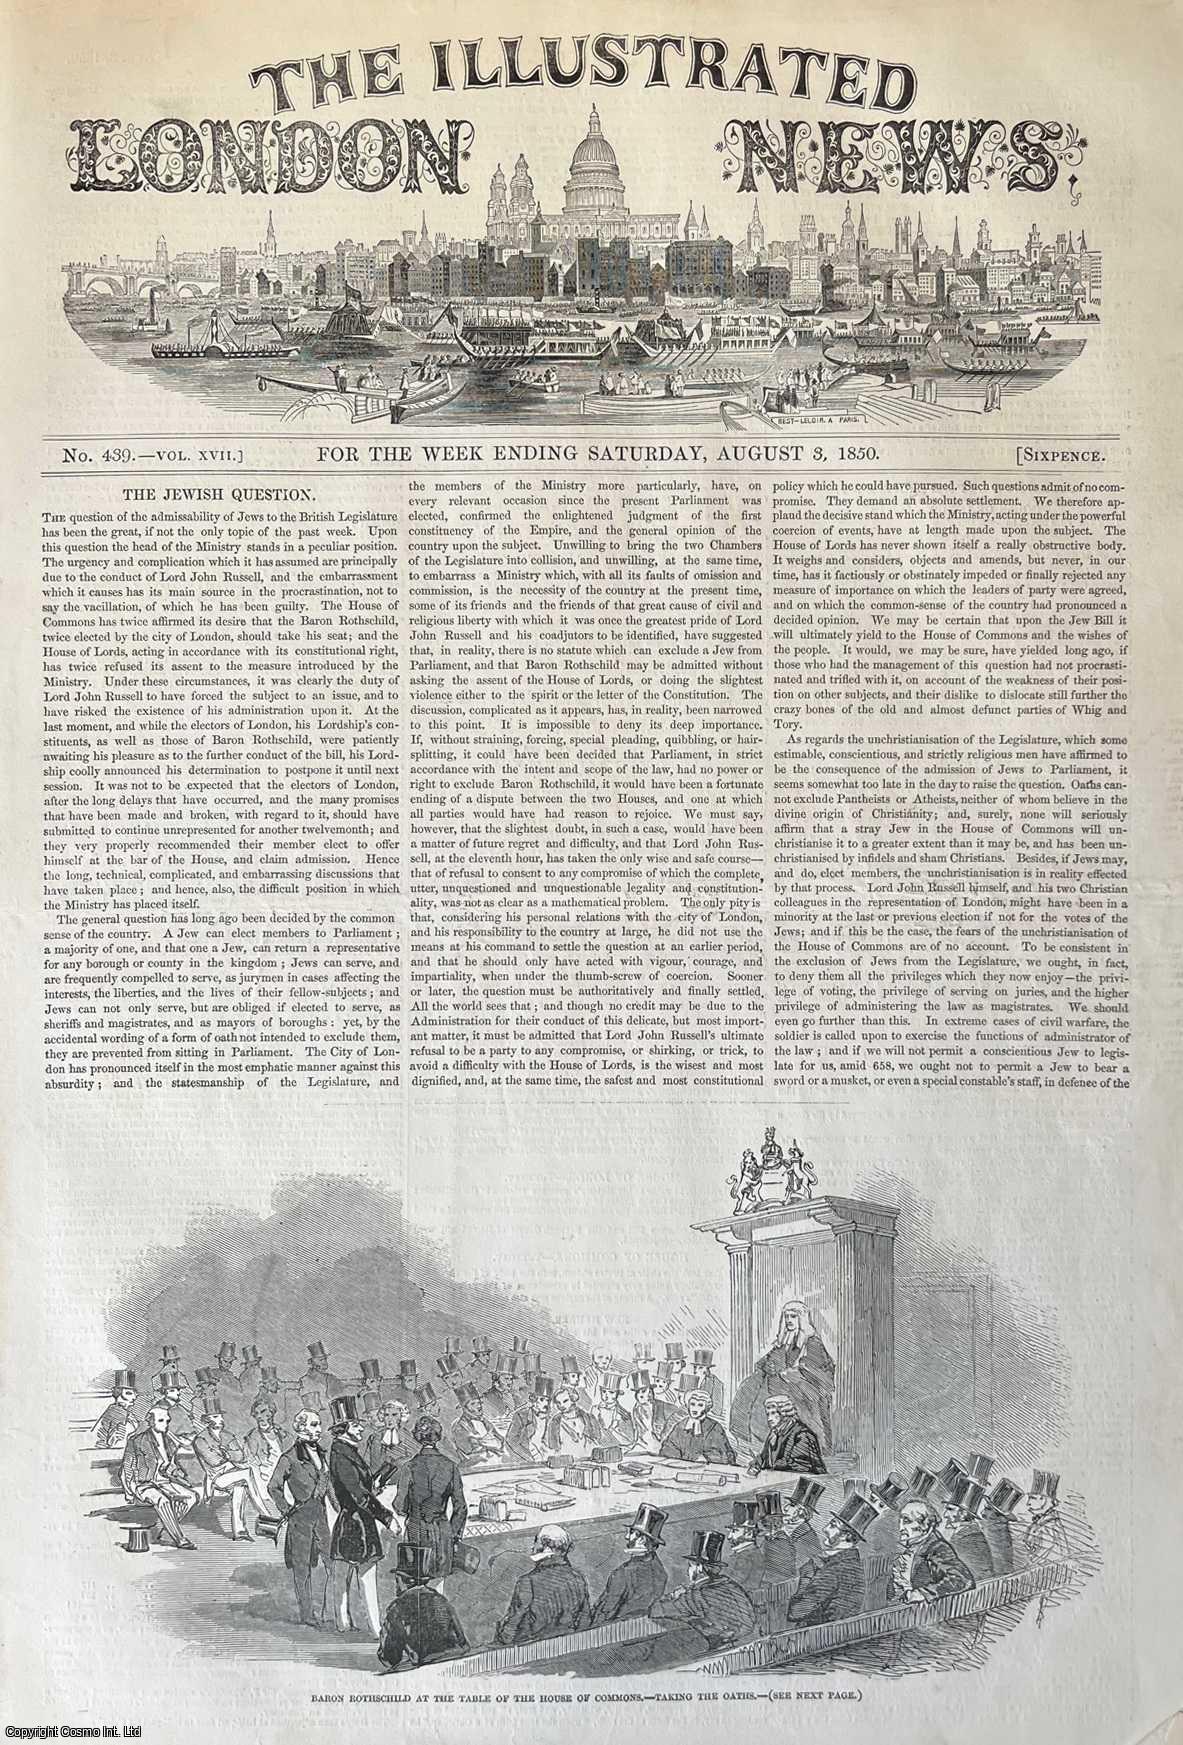 JEWRY - The Jewish Question, with an illustration of Baron Rothschild at the Table of the House of Commons. An Illustrated London News front page with masthead. An original print from the Illustrated London News, 1850.